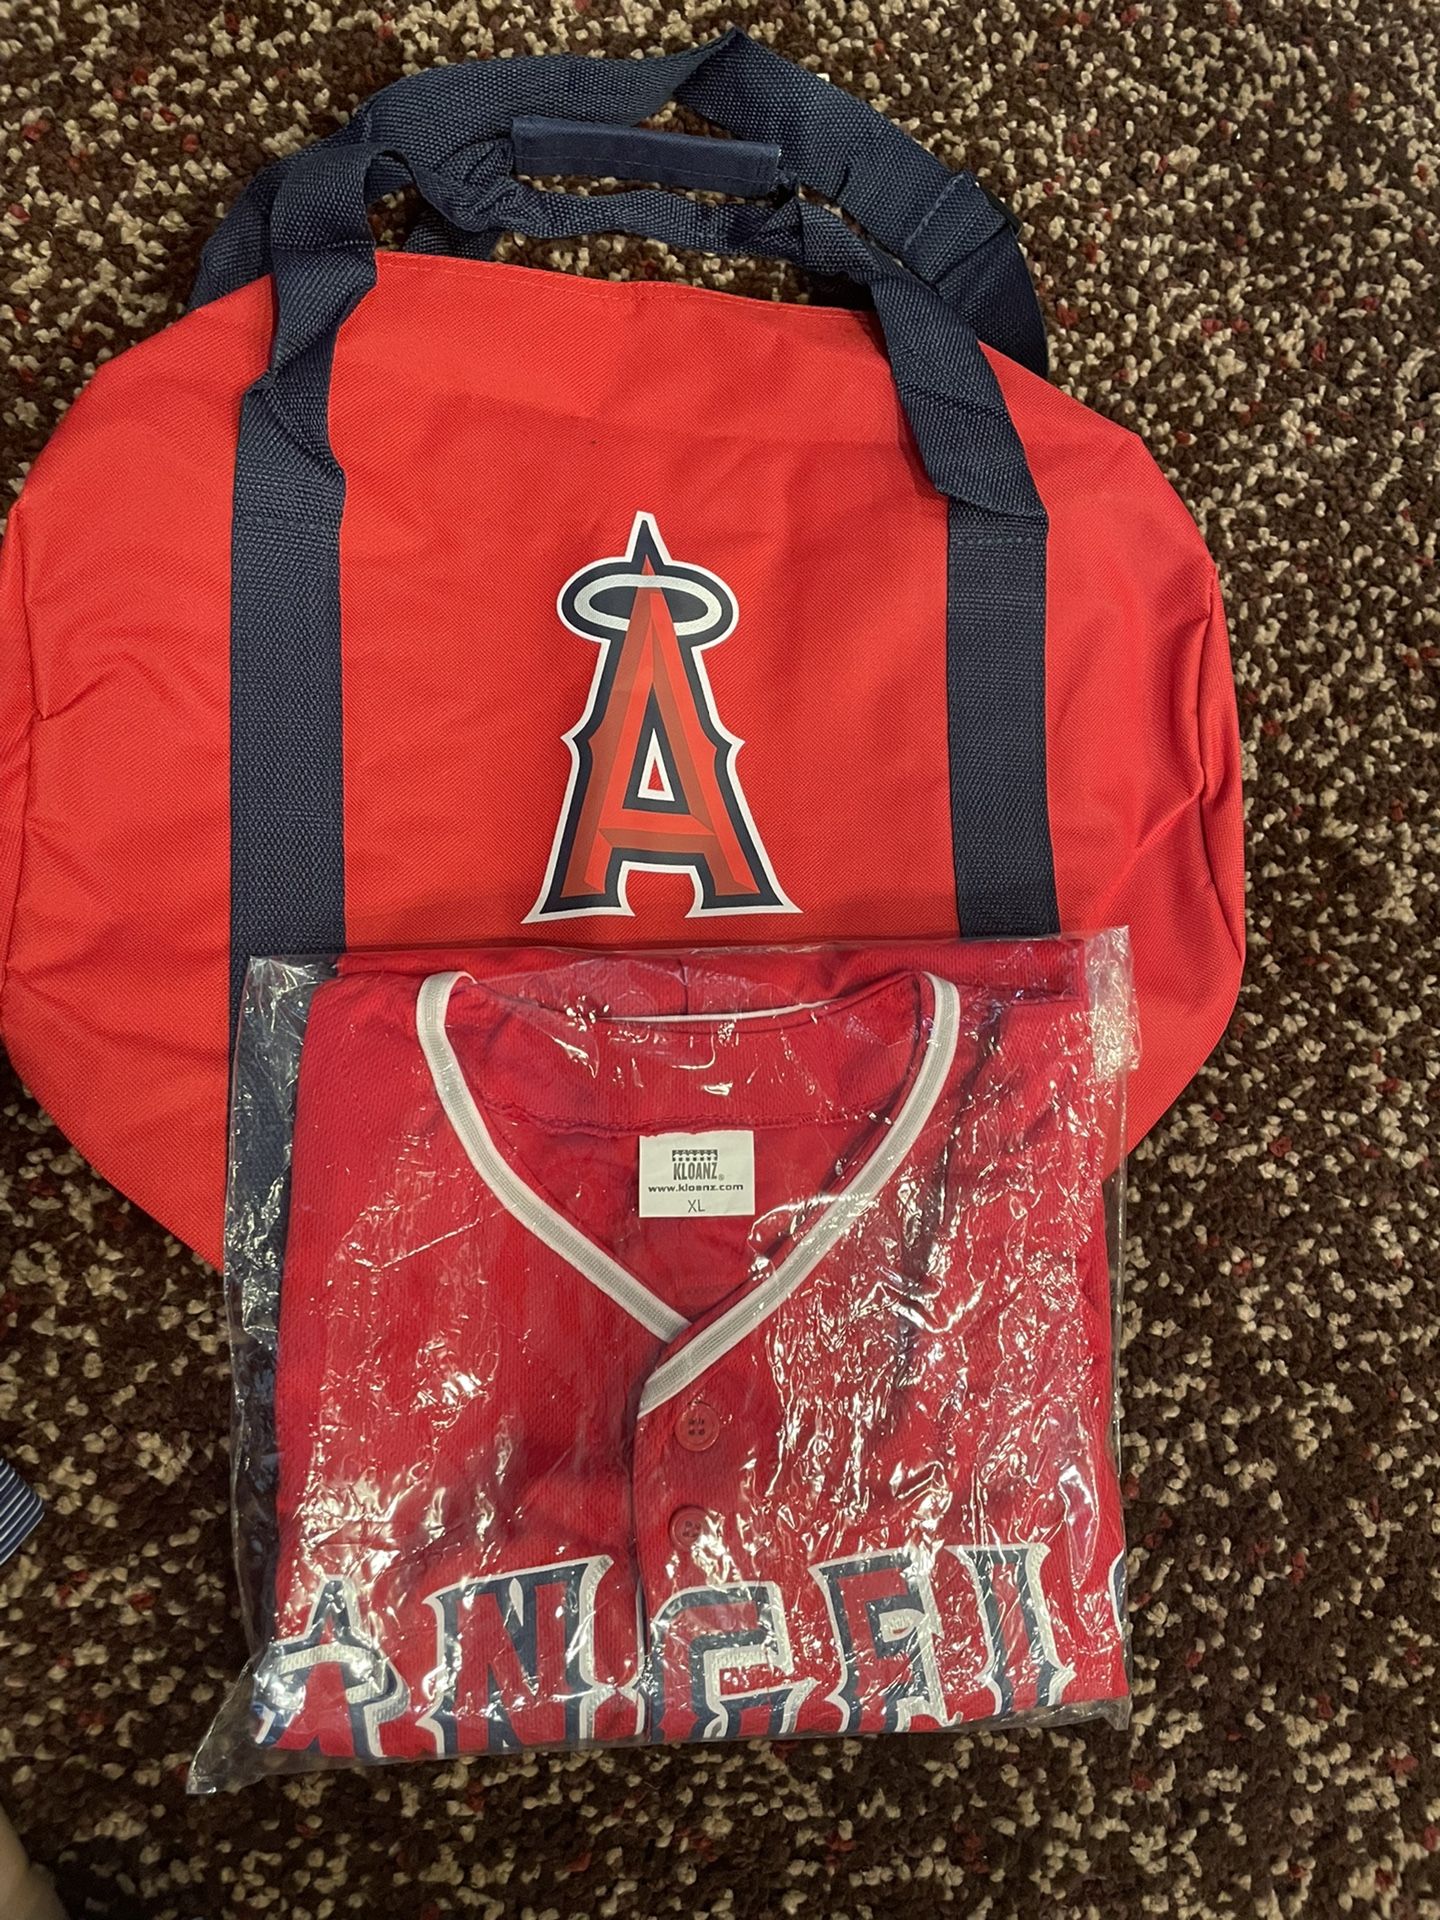 Angels Baseball Mike Trout Jersey And Duffle Bag 